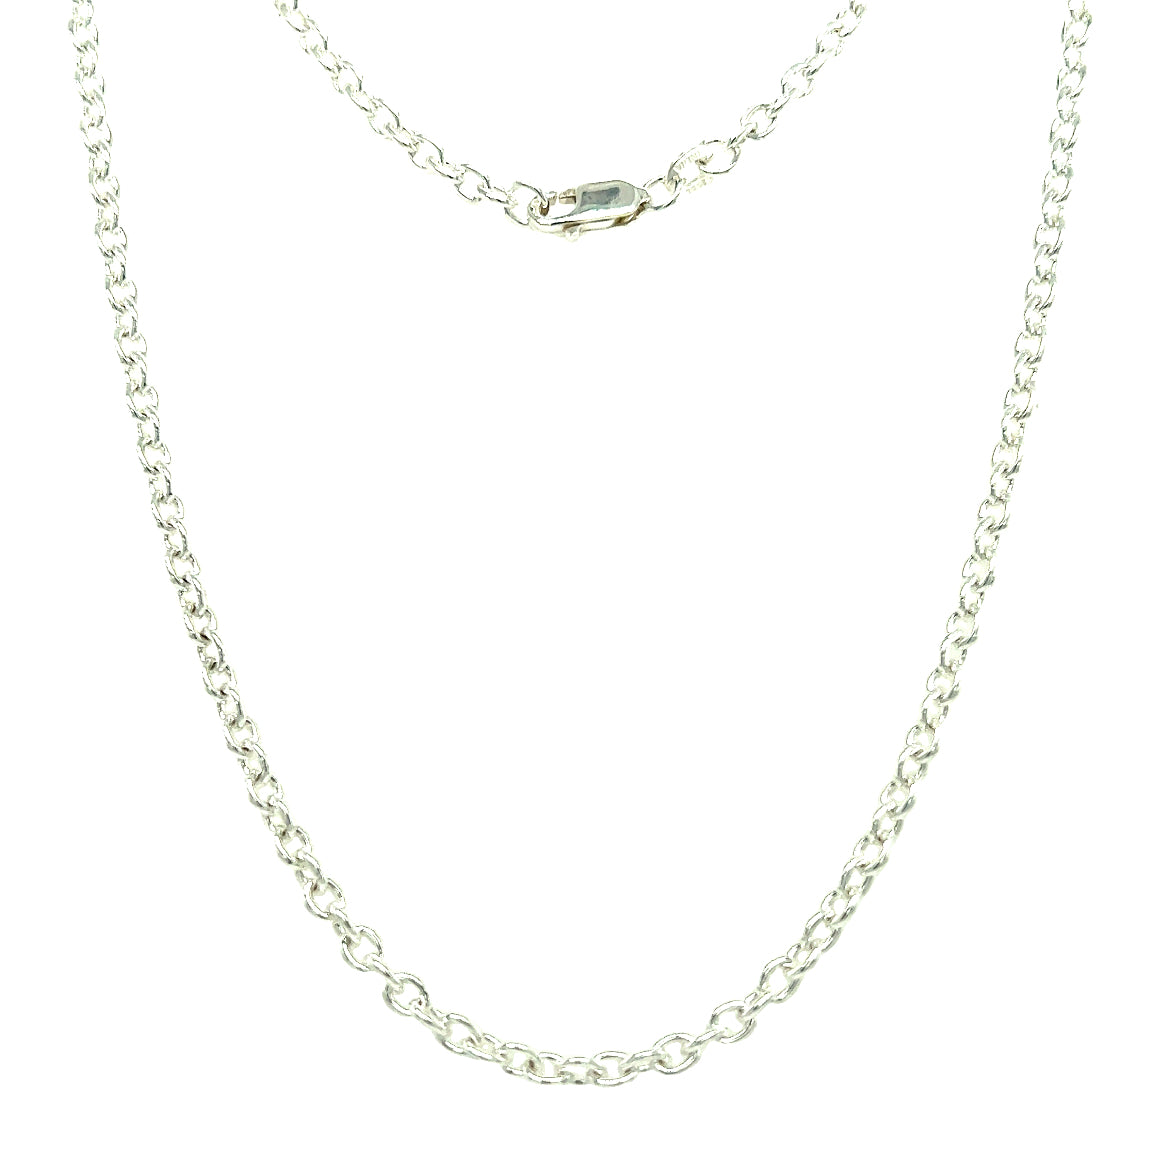 Cable Chain 2.75mm with 24in of Length in Sterling Silver Full Chain Front View